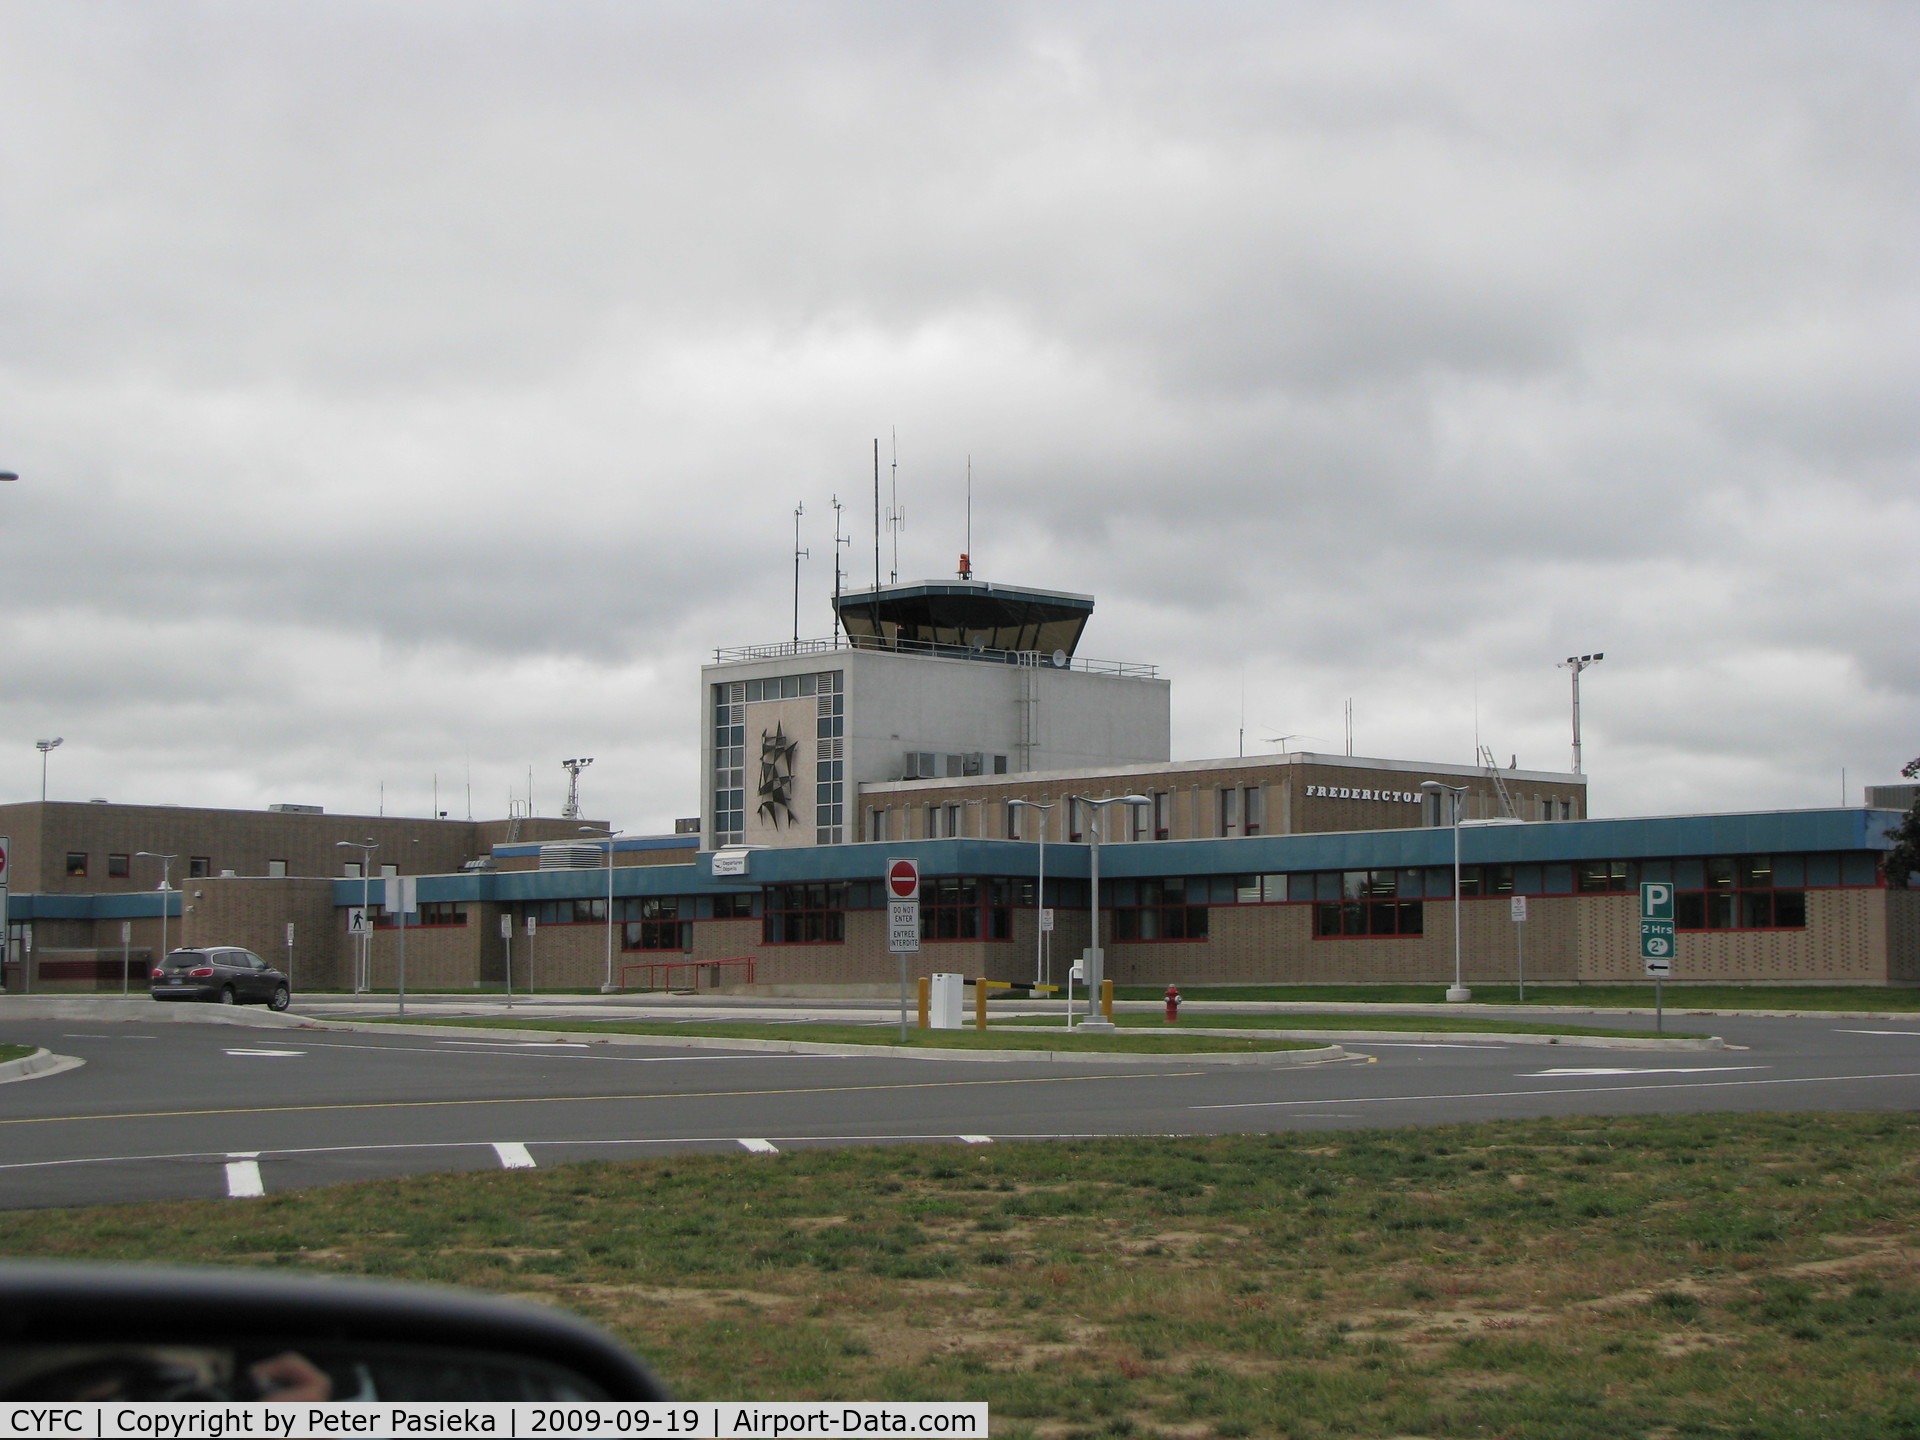 Greater Fredericton Airport (Fredericton International Airport), Fredericton, New Brunswick Canada (CYFC) - control tower of the Fredericton Airport